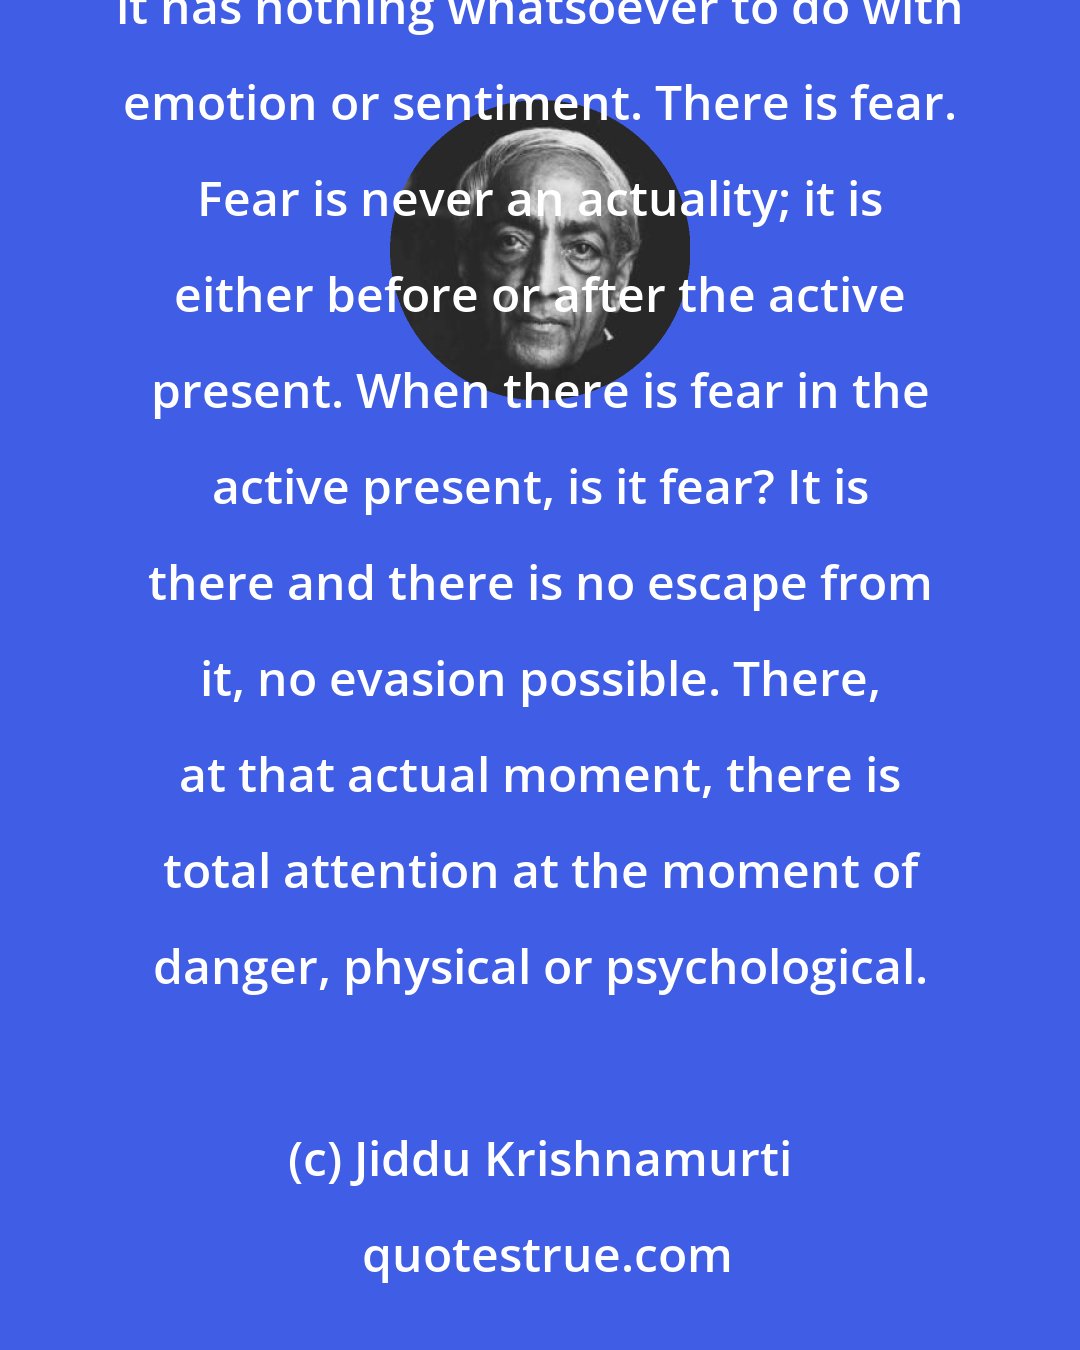 Jiddu Krishnamurti: There is always great beauty, not of images, feeling or thought. Beauty is neither thought nor feeling; it has nothing whatsoever to do with emotion or sentiment. There is fear. Fear is never an actuality; it is either before or after the active present. When there is fear in the active present, is it fear? It is there and there is no escape from it, no evasion possible. There, at that actual moment, there is total attention at the moment of danger, physical or psychological.